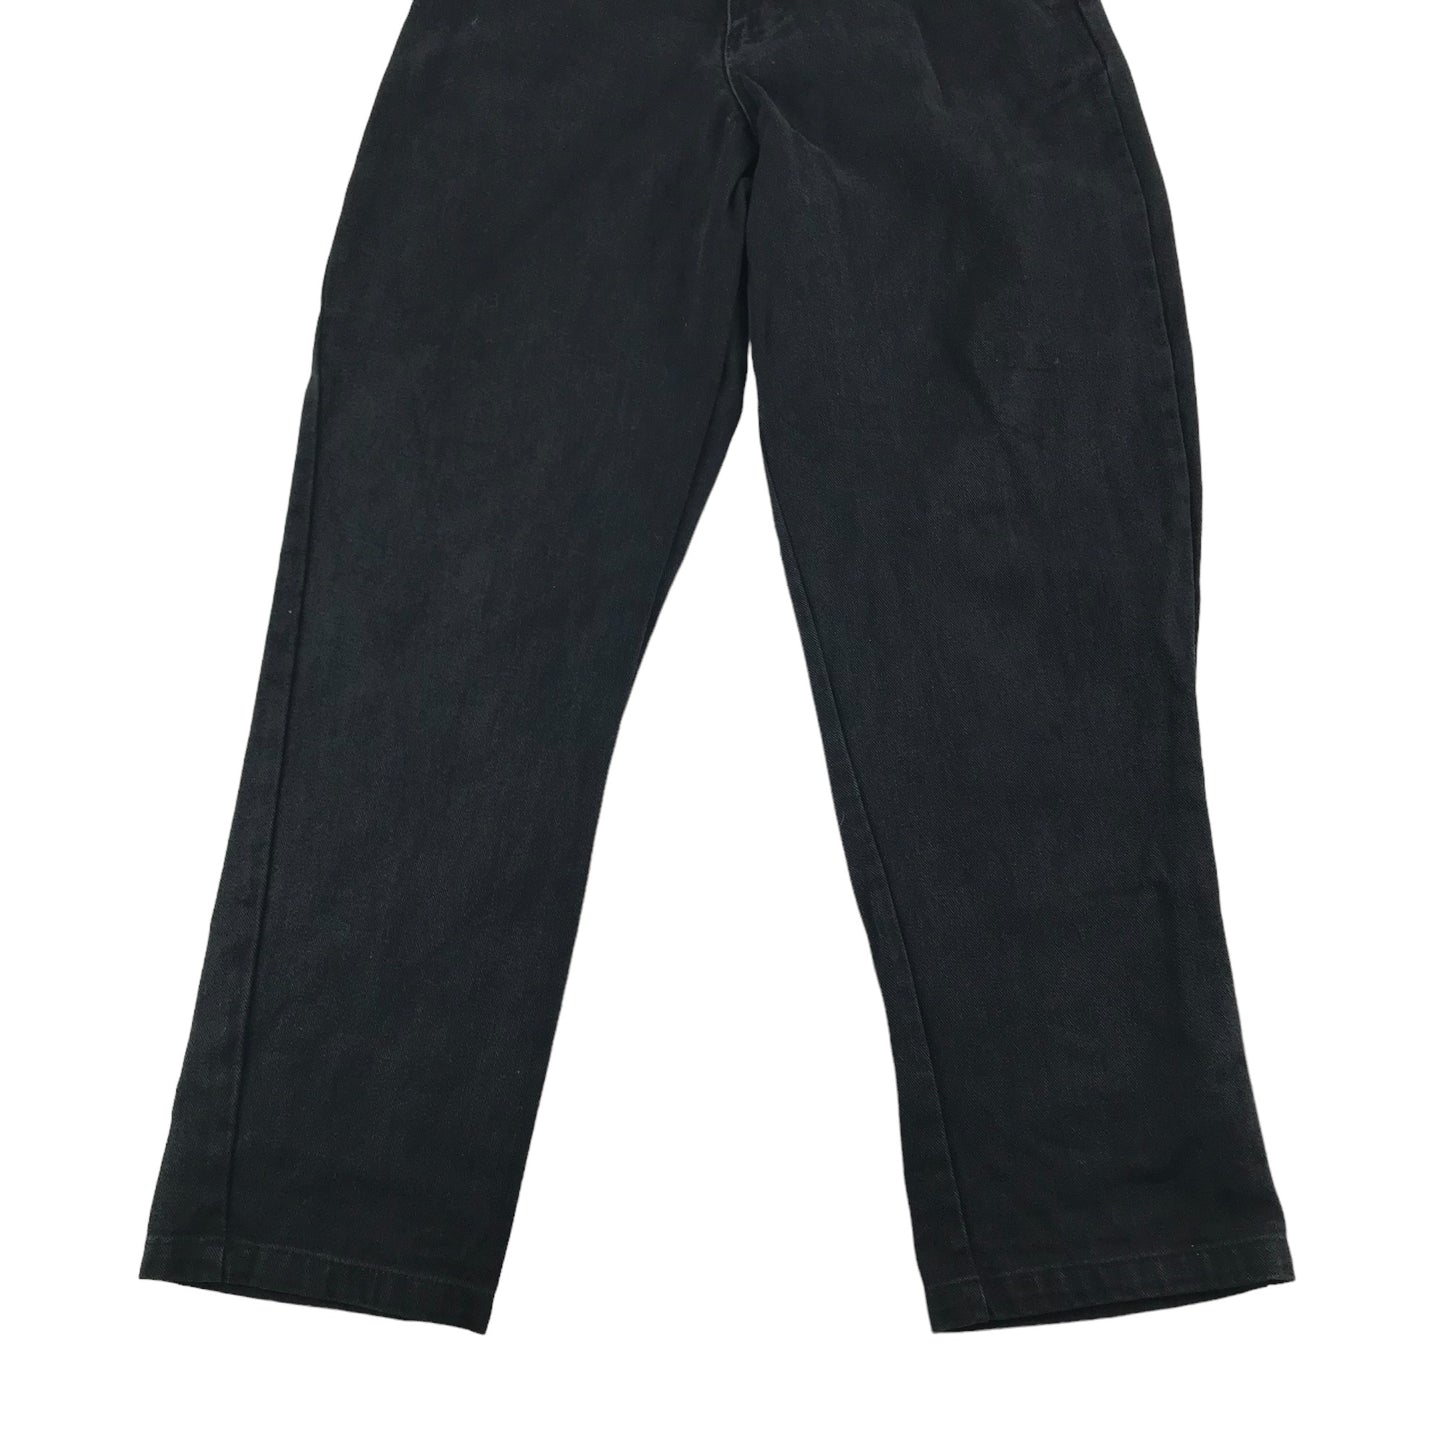 Lucy and Yak Jeans Size W26 L30 Black High Waist Denim Trousers Organic Cotton